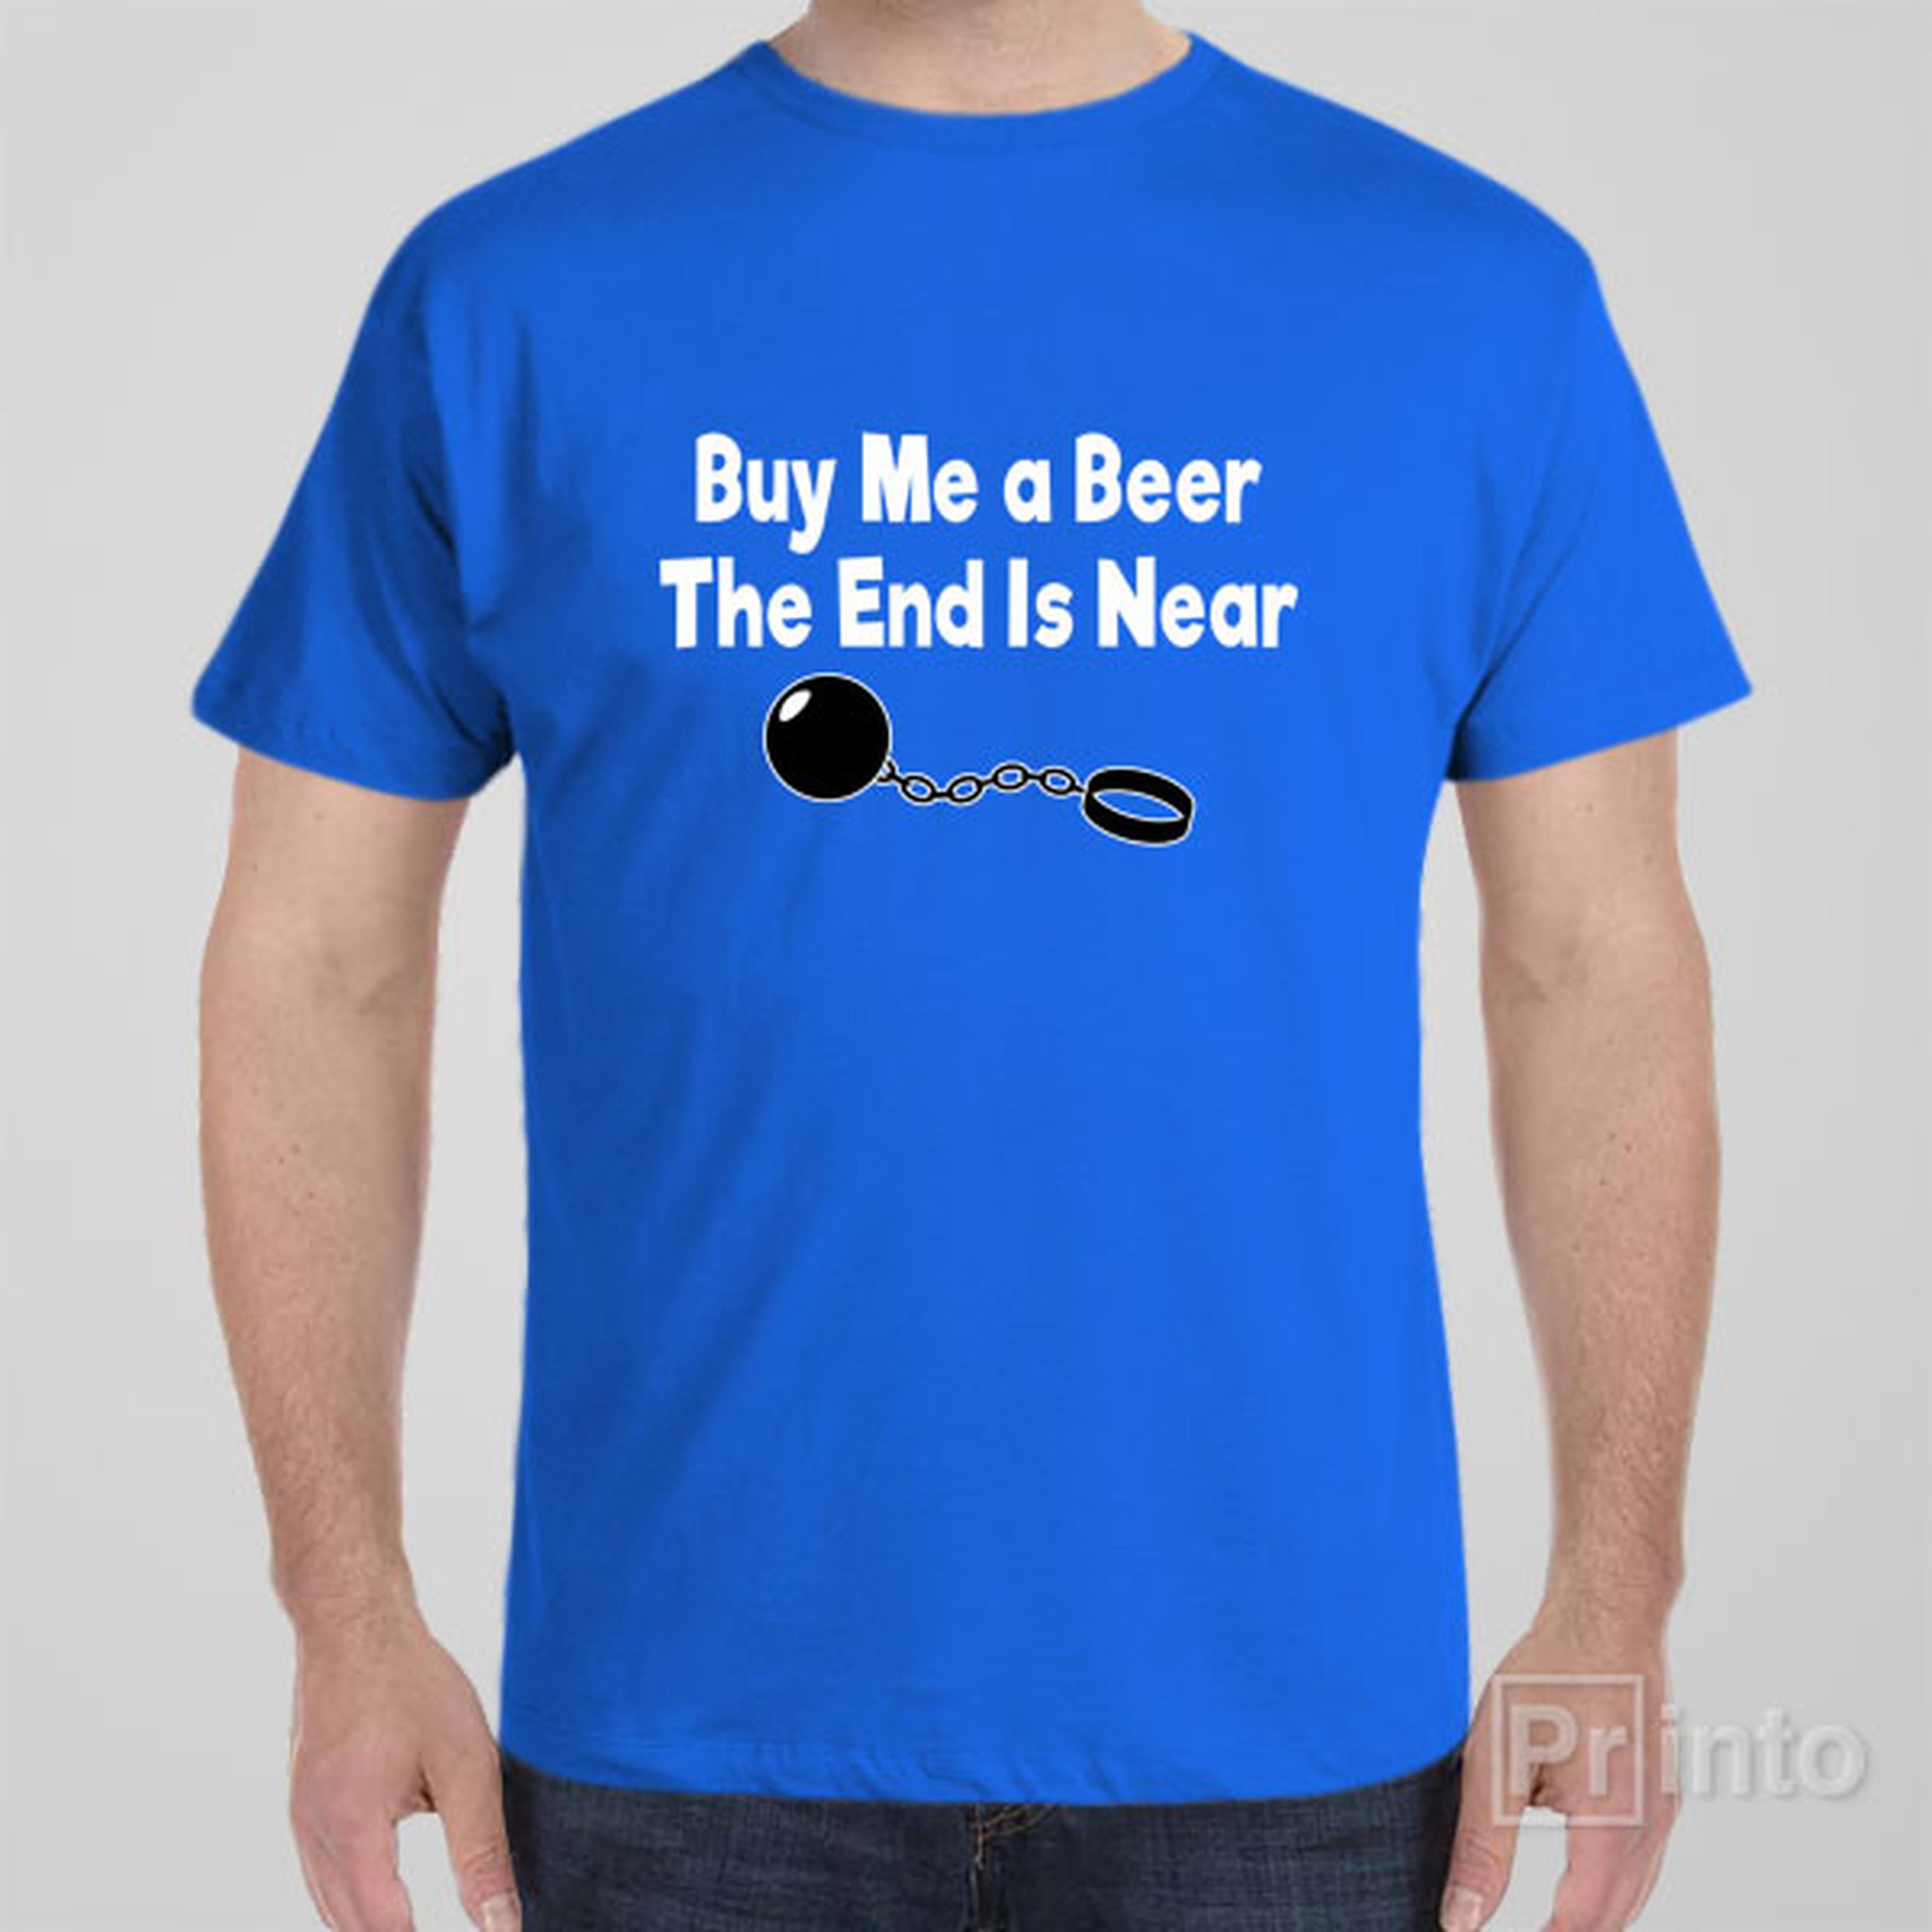 buy-me-a-beer-the-end-is-near-t-shirt